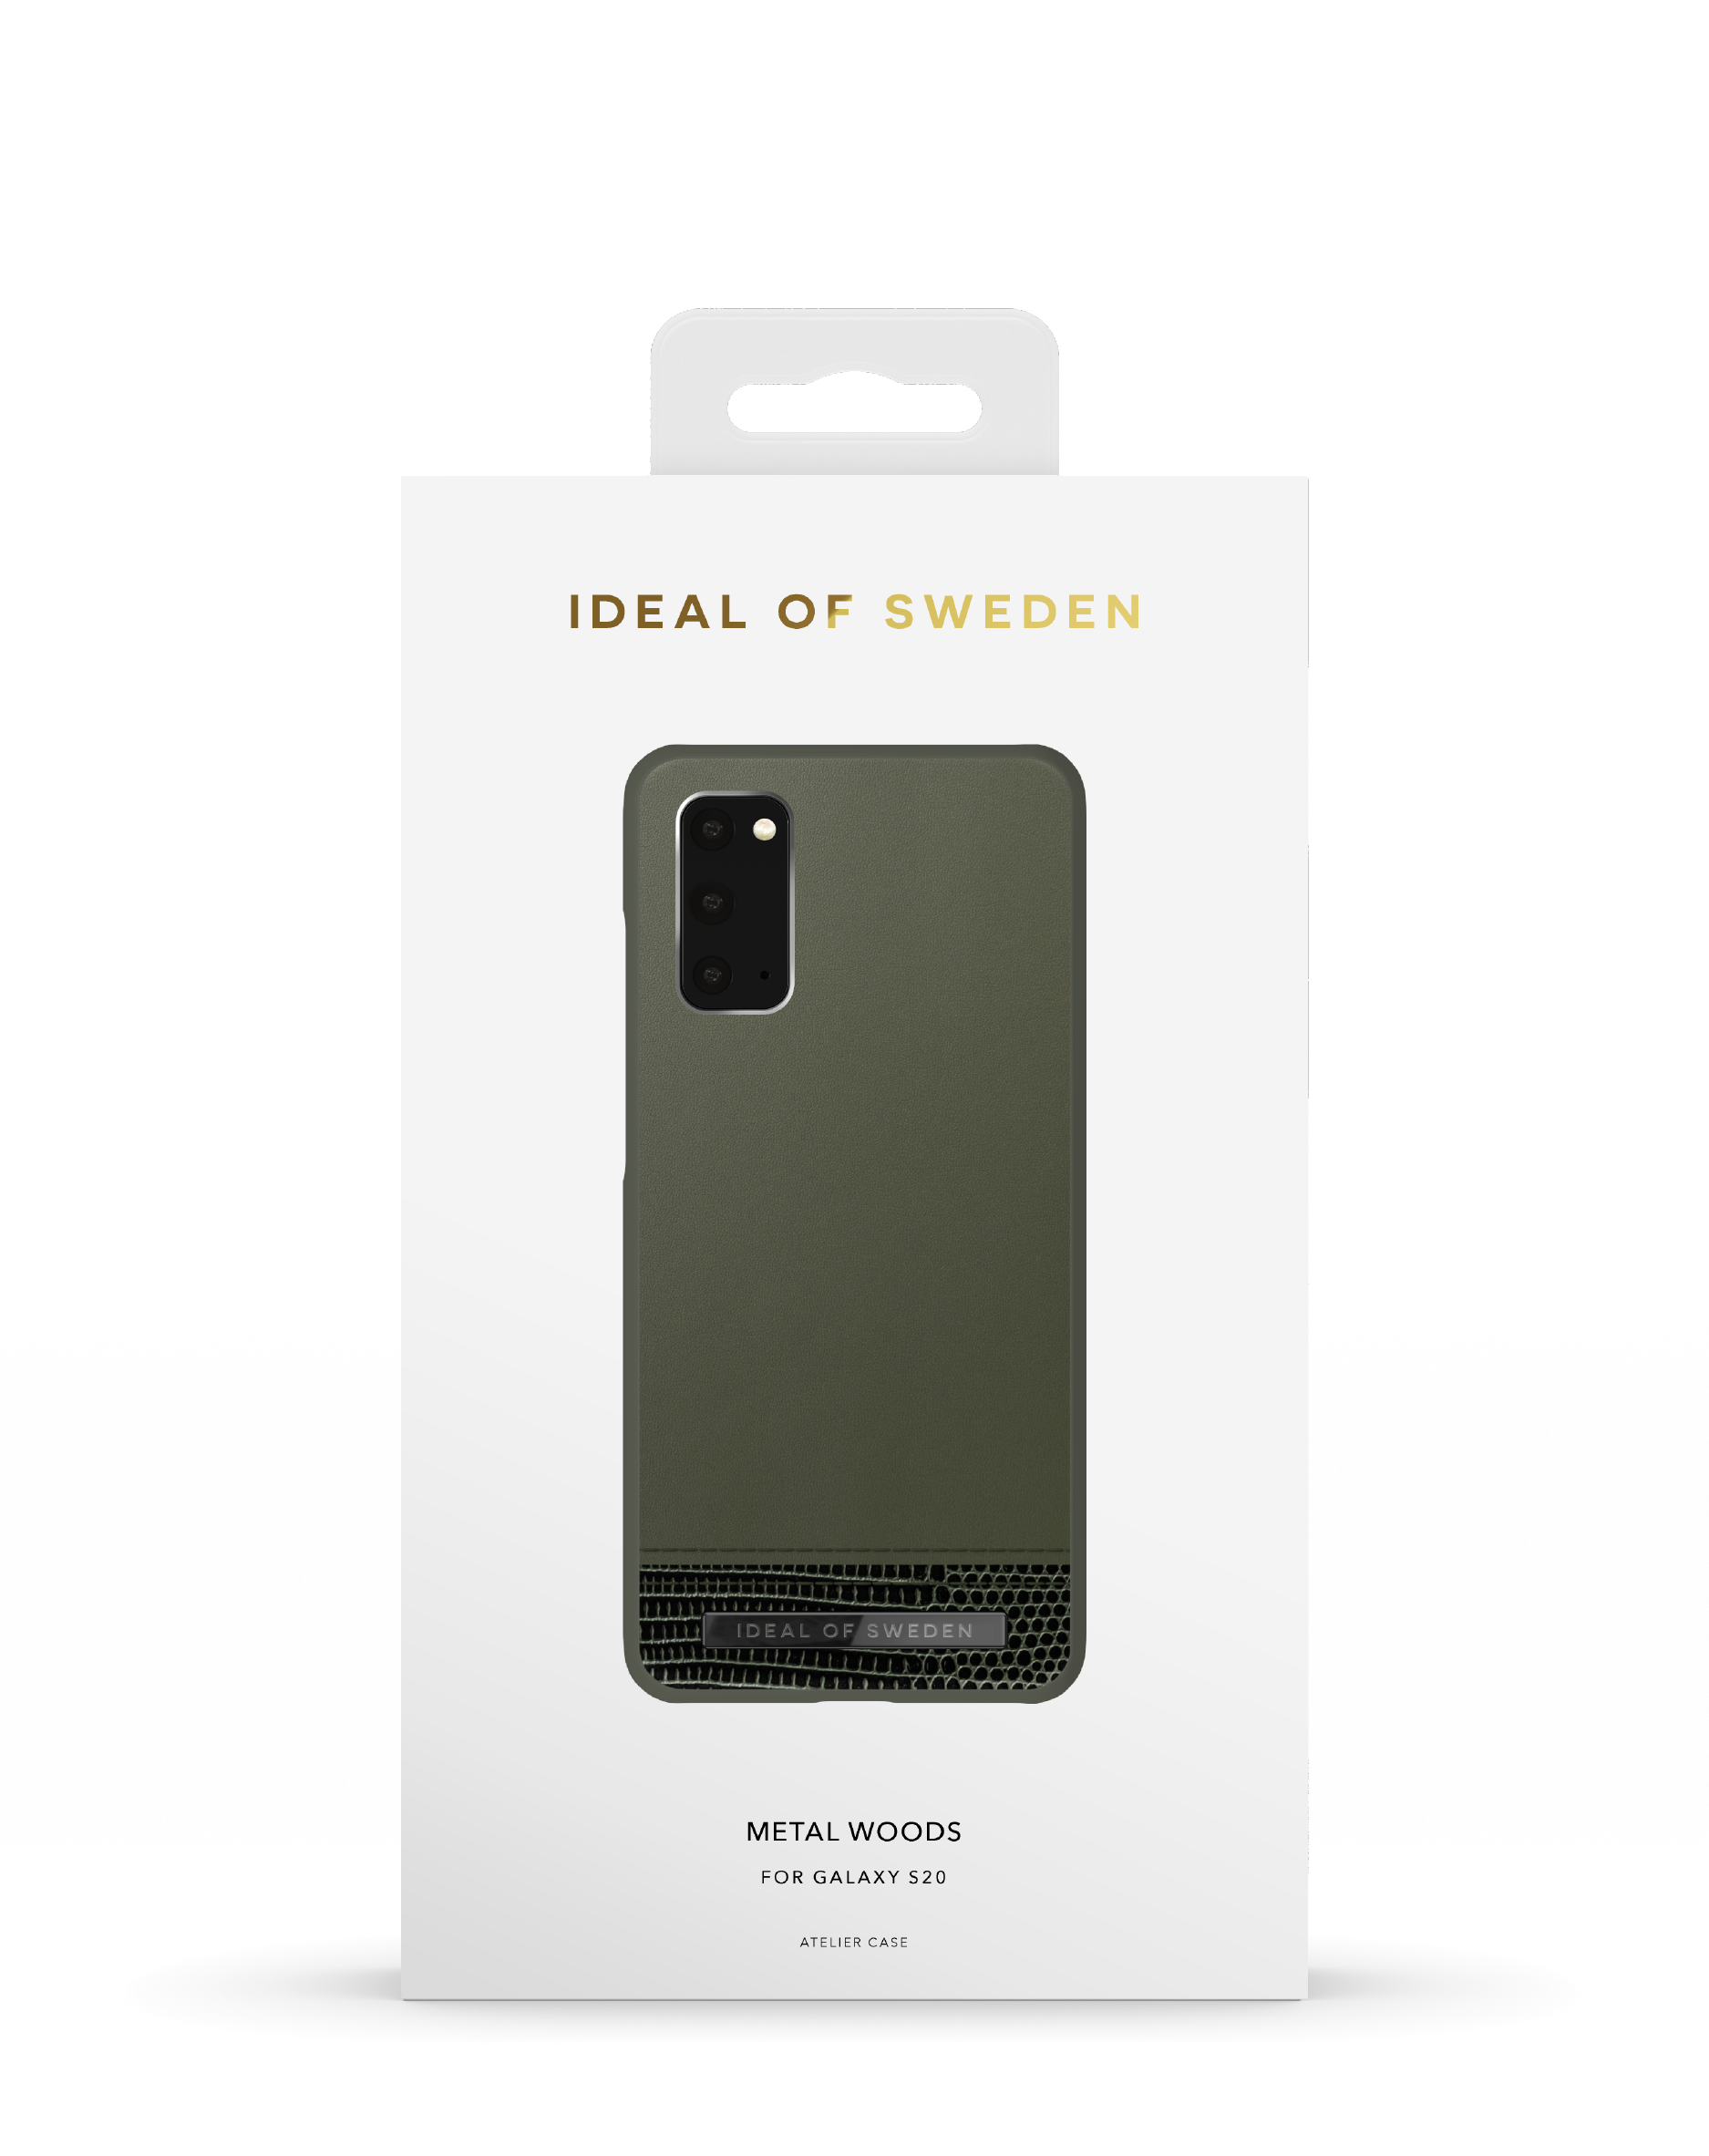 IDEAL Backcover, OF S20, IDACAW20-S11E-235, Woods Galaxy Metal SWEDEN Samsung,